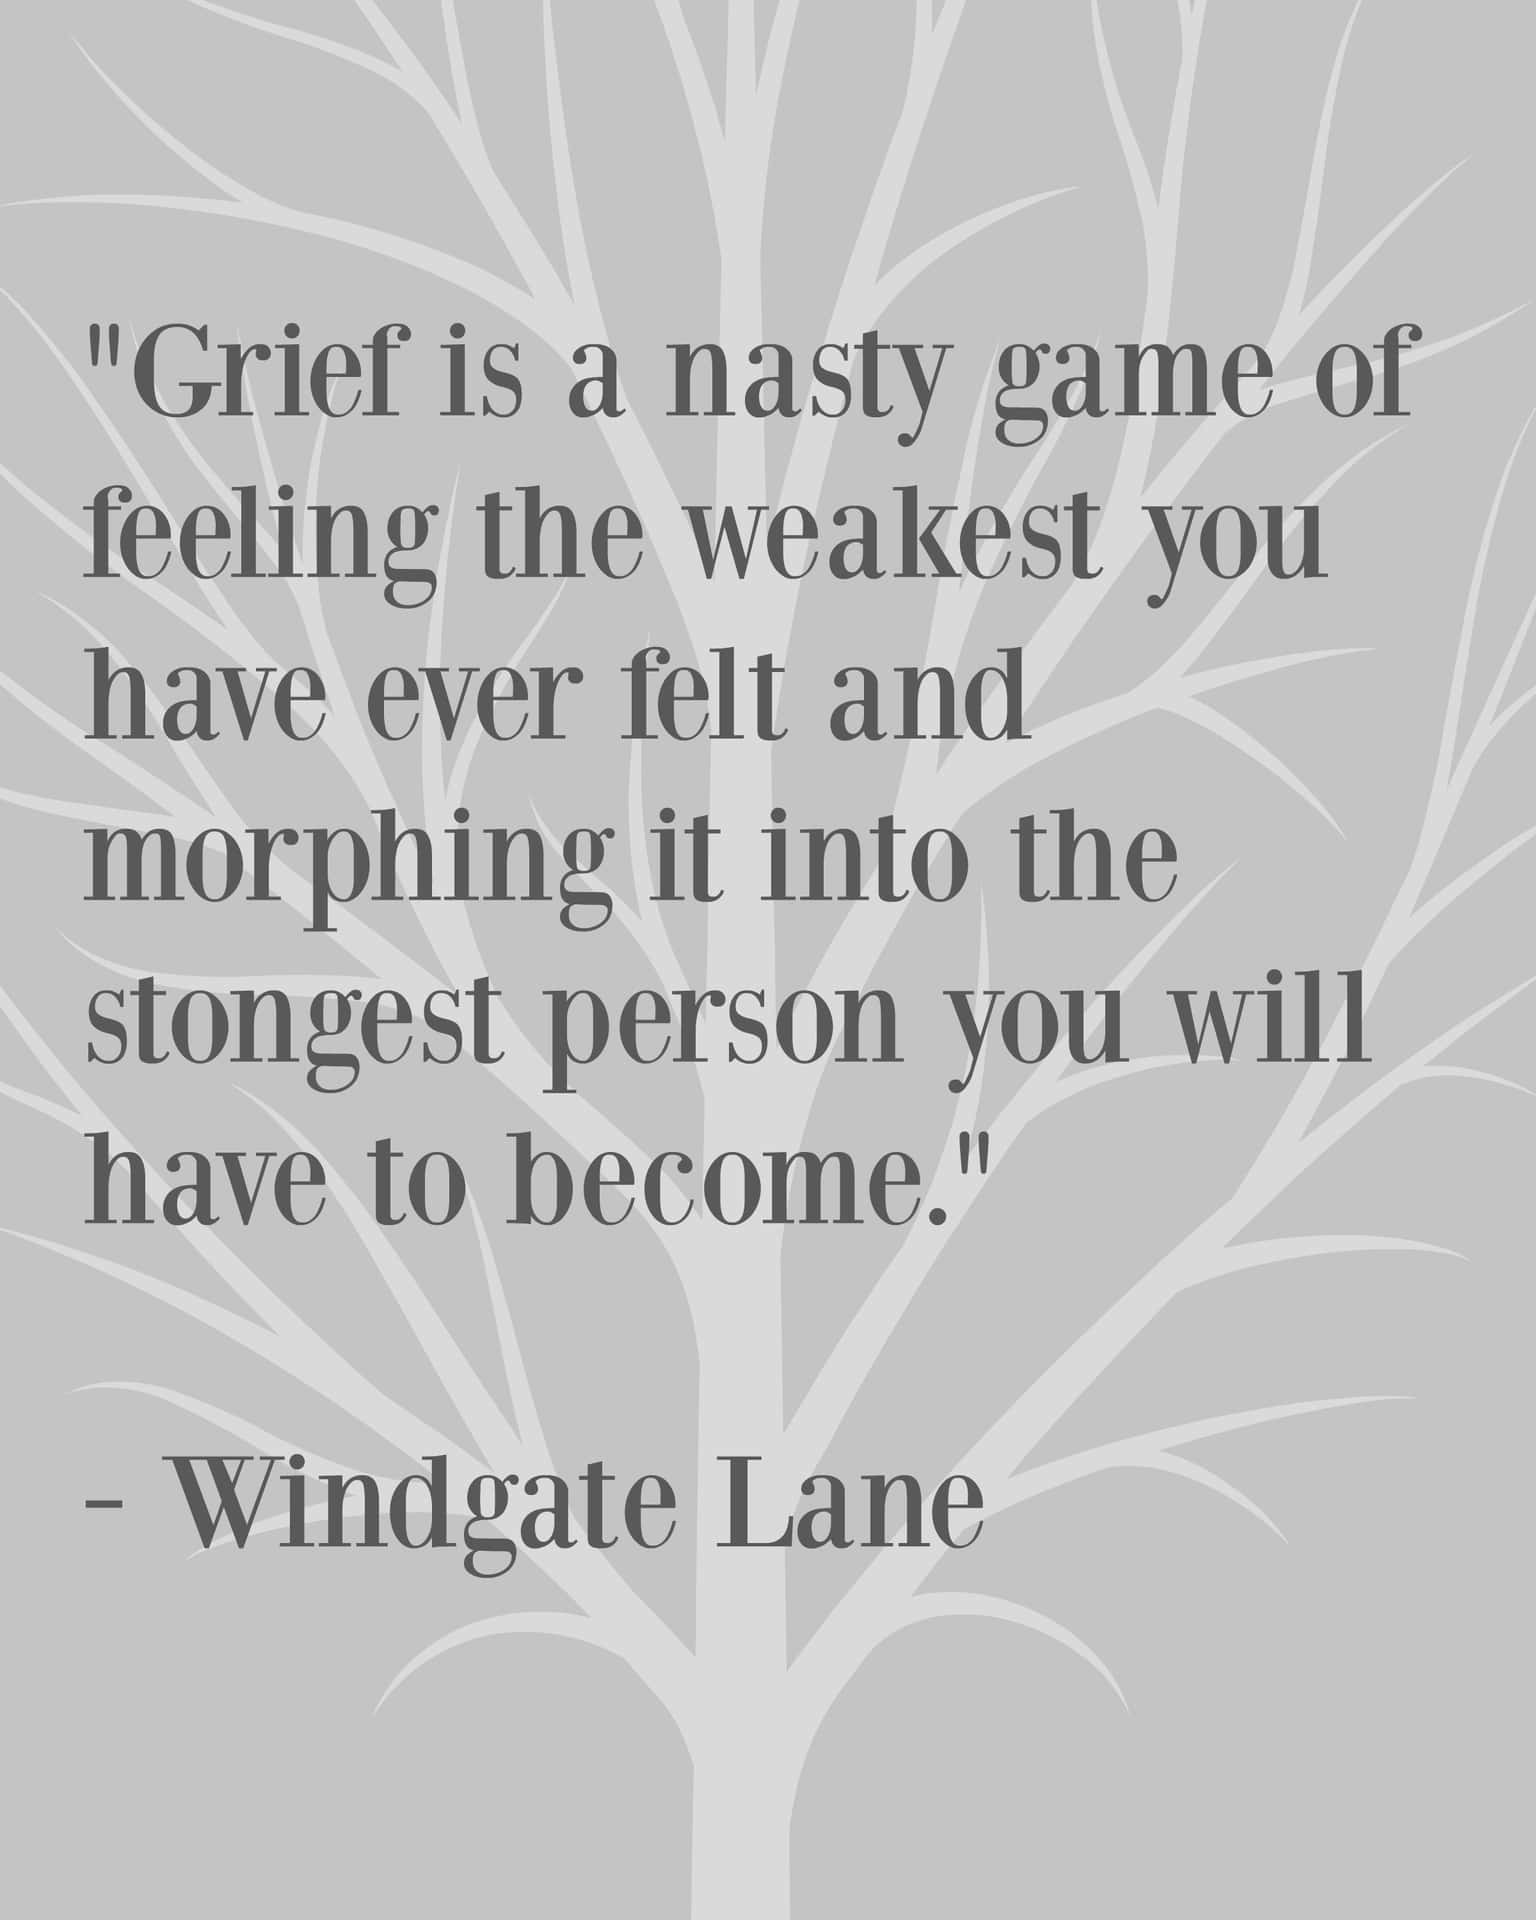 A Quote About Grief By Windward Lane